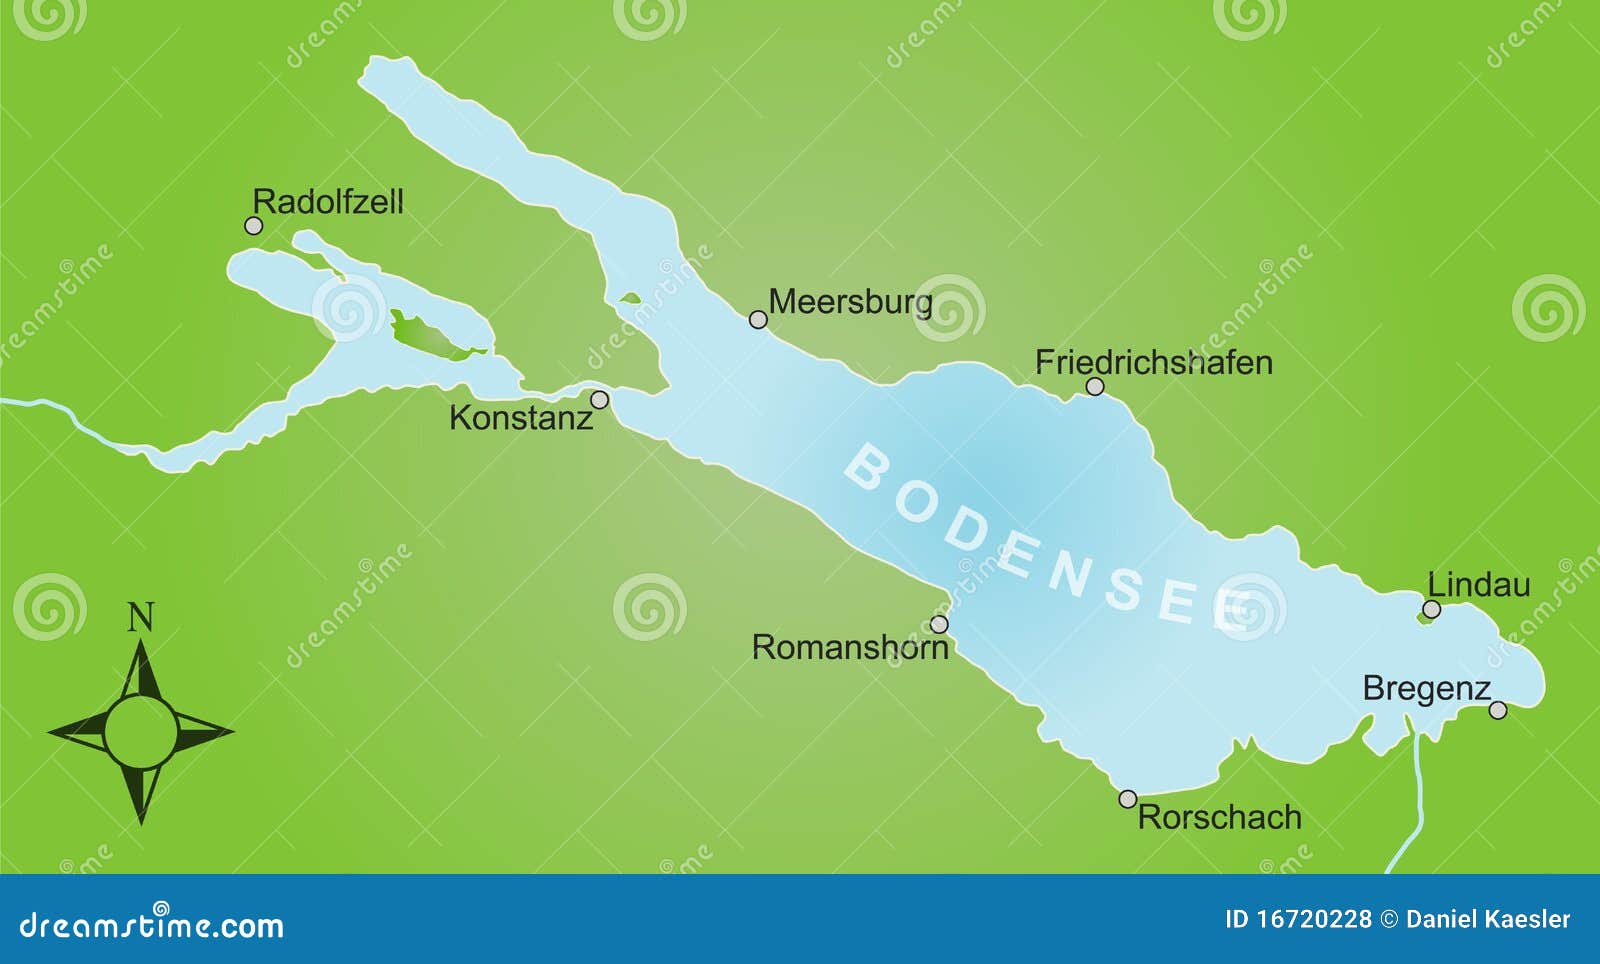 stylized map of lake constance and surroundings